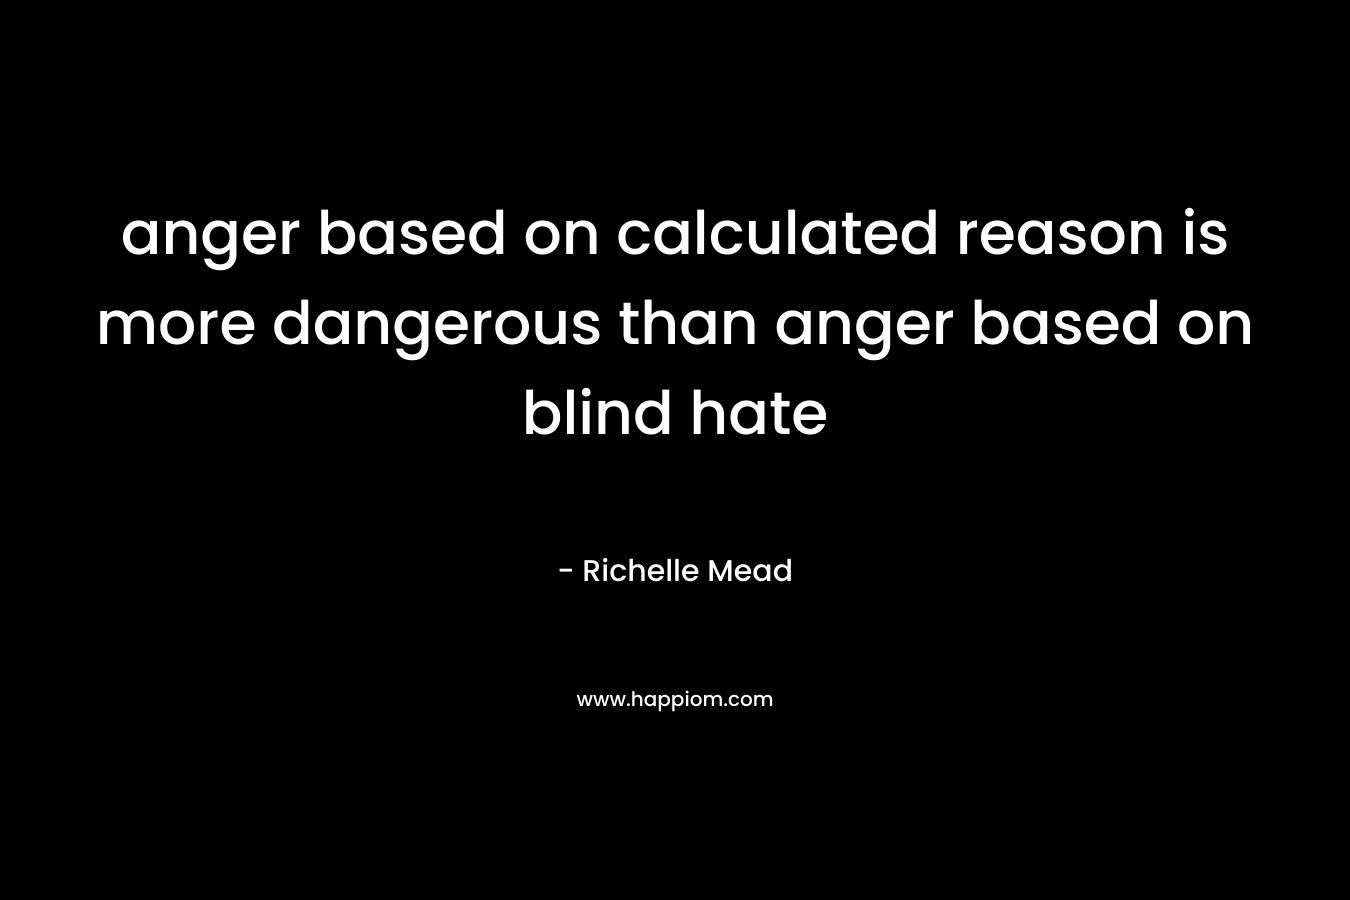 anger based on calculated reason is more dangerous than anger based on blind hate